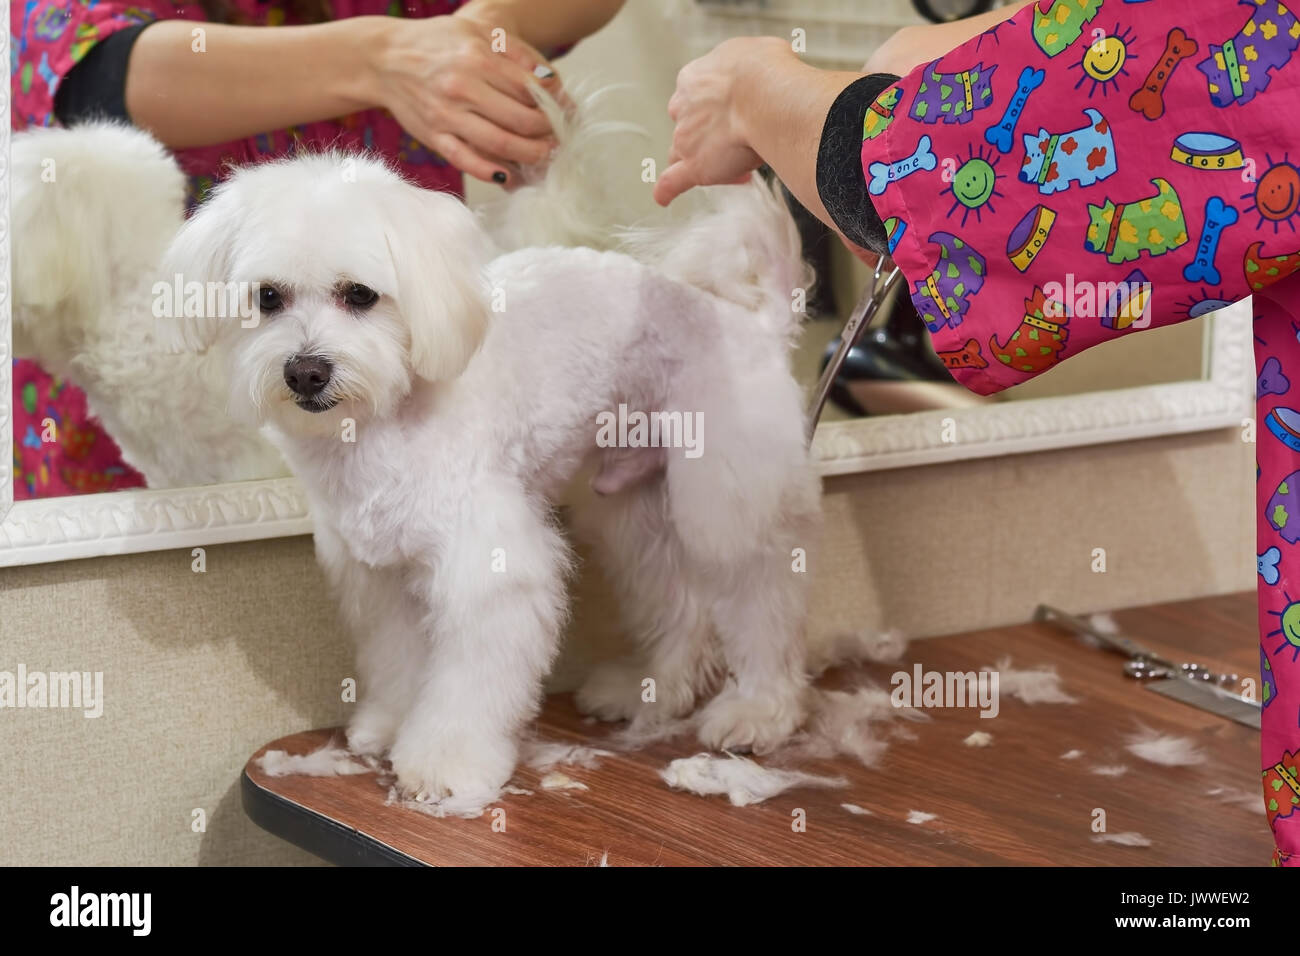 Cute White Maltese Being Groomed Hands With Scissors Dog